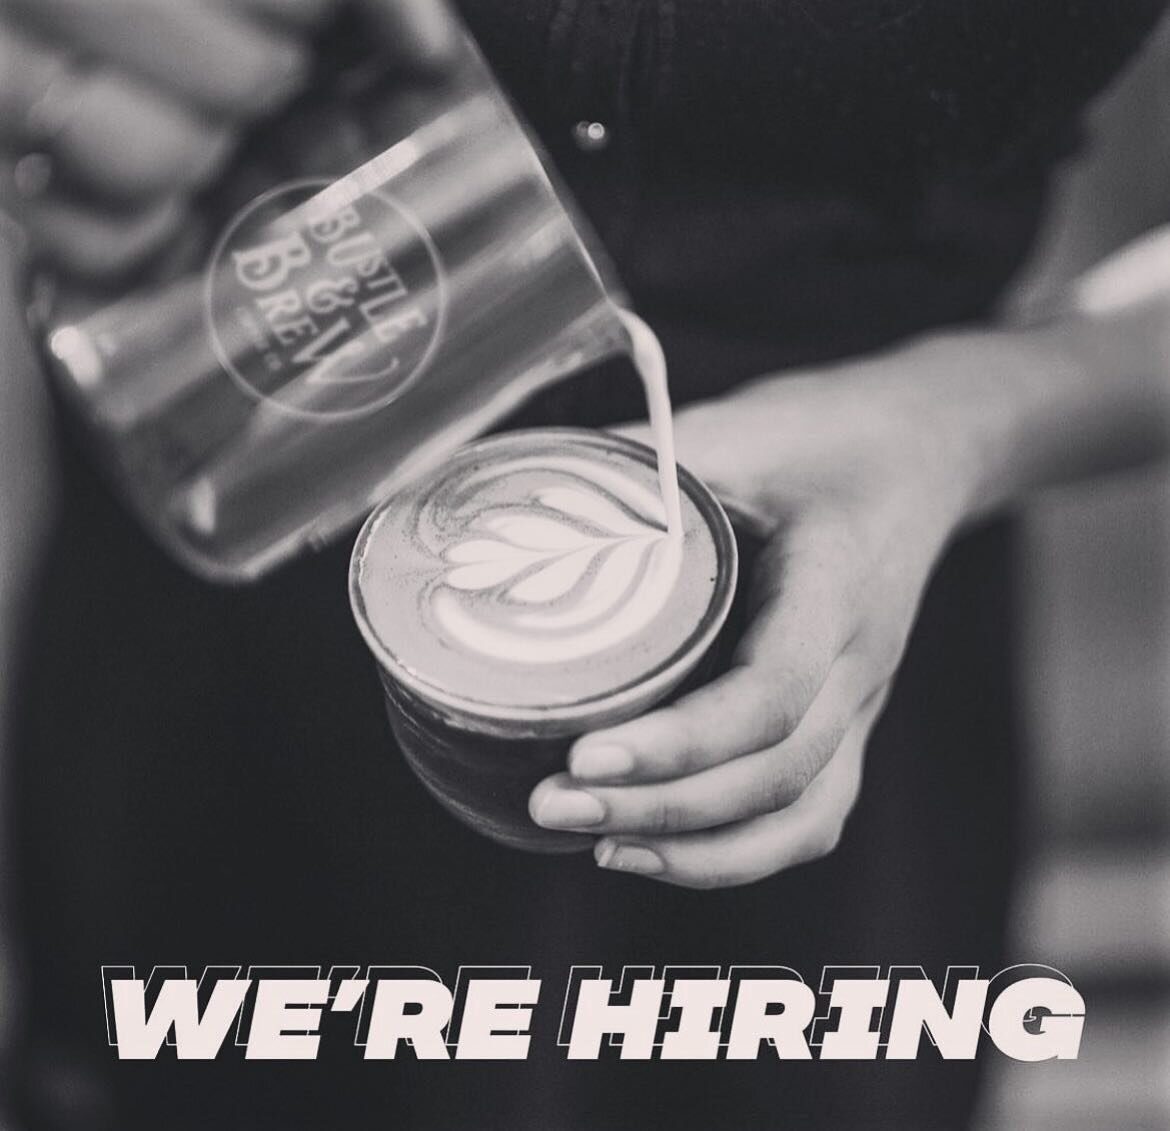 Bustle &amp; Brew is looking for a part time employee. Someone who enjoys coffee, loves people, and can work mornings. DM or email us if interested at info@bustleandbrew.com

#southflorida 
#boyntonbeach 
#delraybeach
#bocaraton
#lakeworth
#wellingto